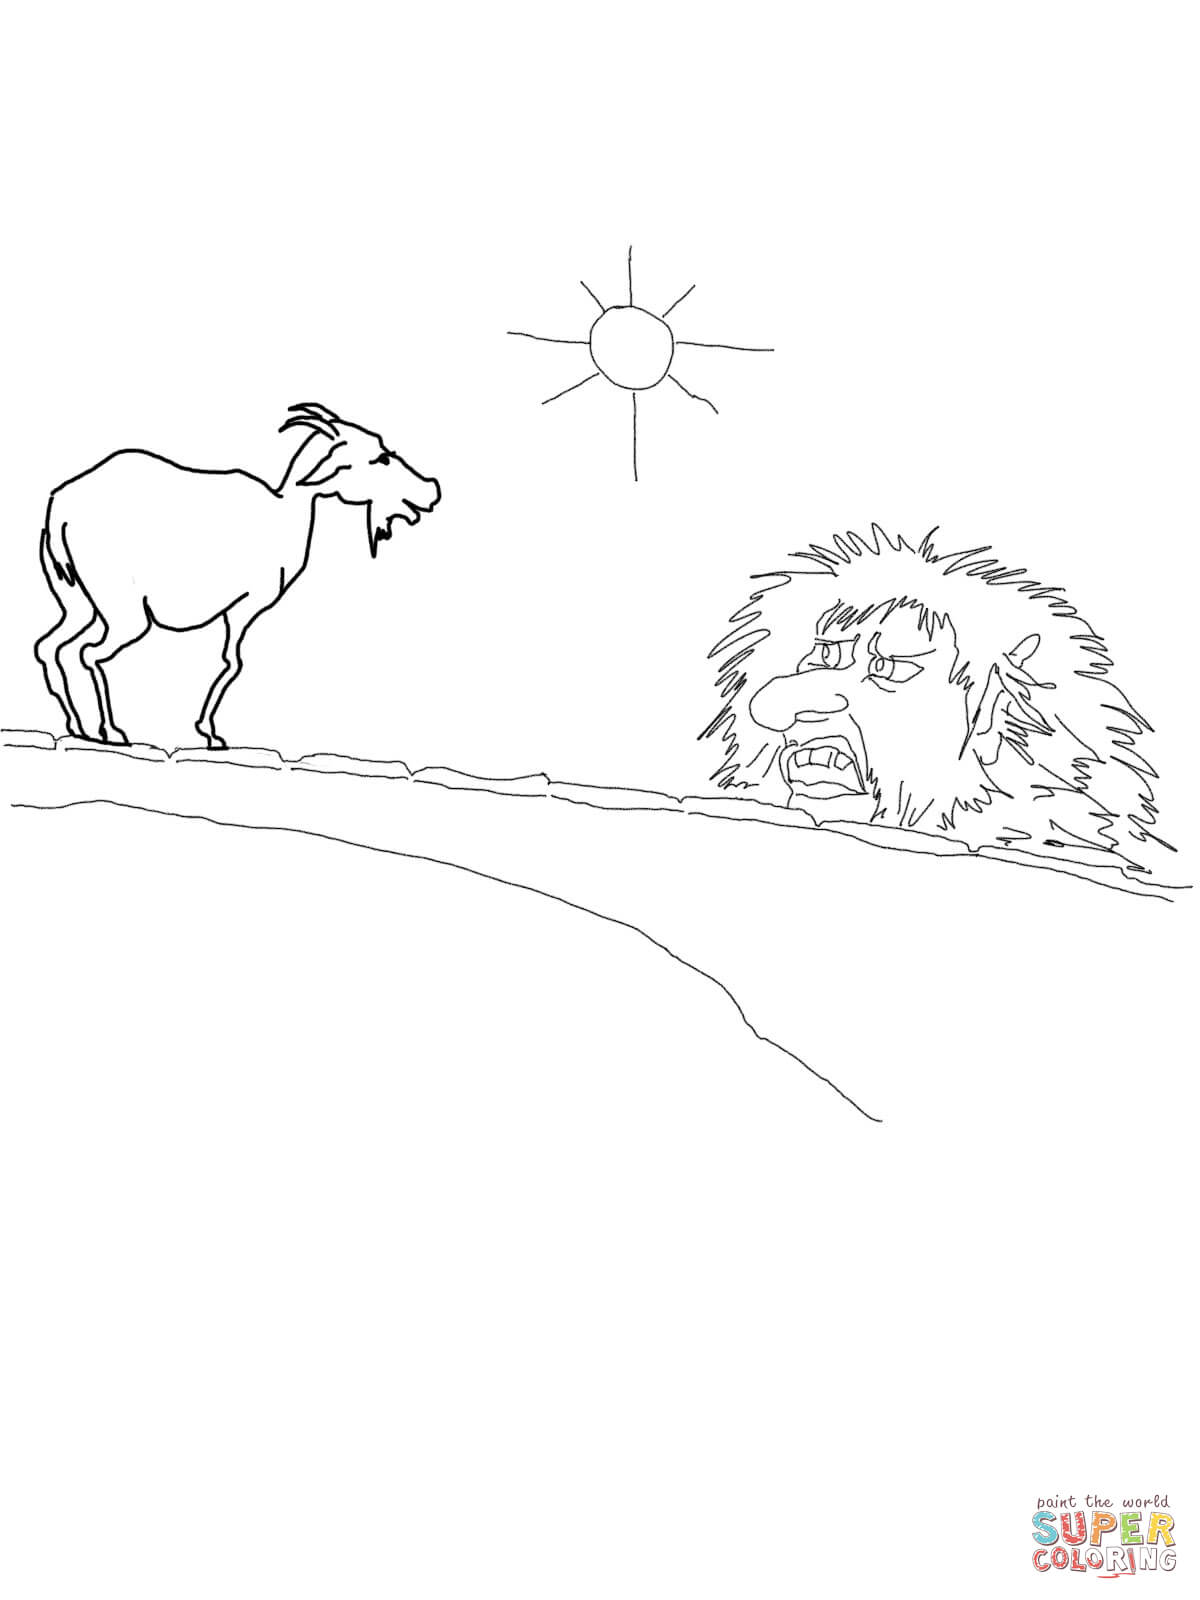 The Middle Billy Goat Speaks to the Troll coloring page | Free ...